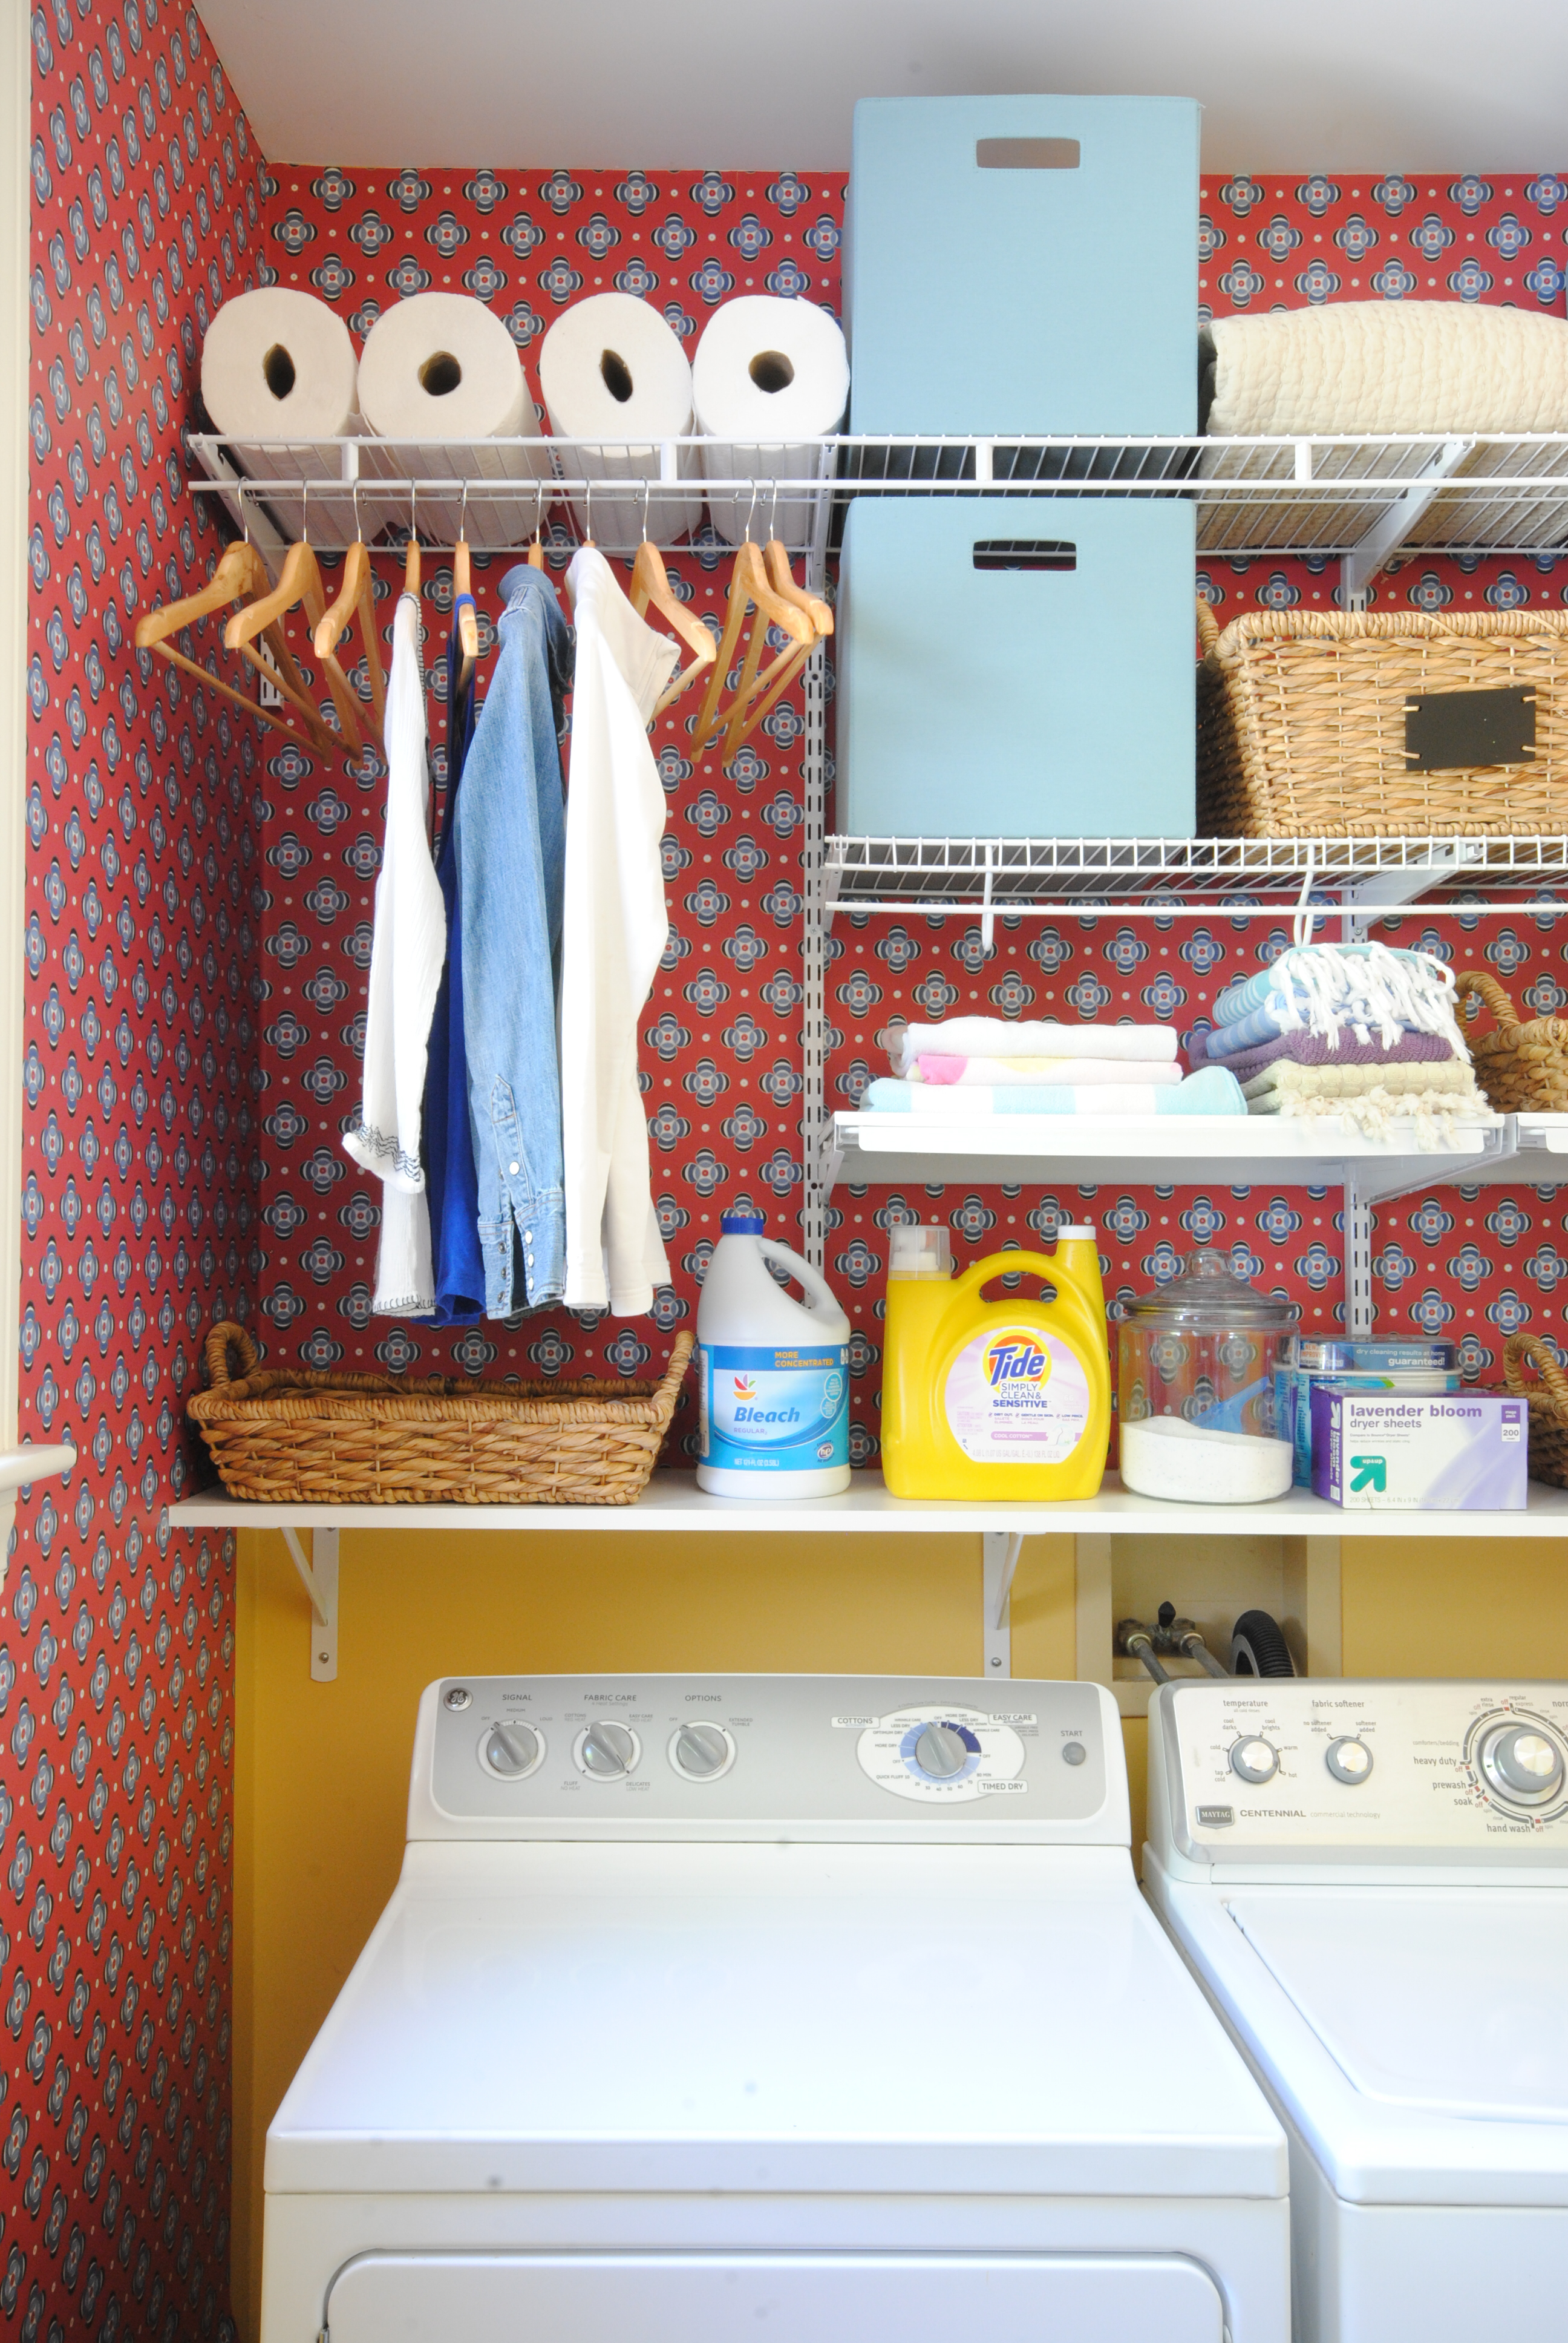 https://www.thechroniclesofhome.com/wp-content/uploads/2016/05/laundry-room-organization-5.jpg